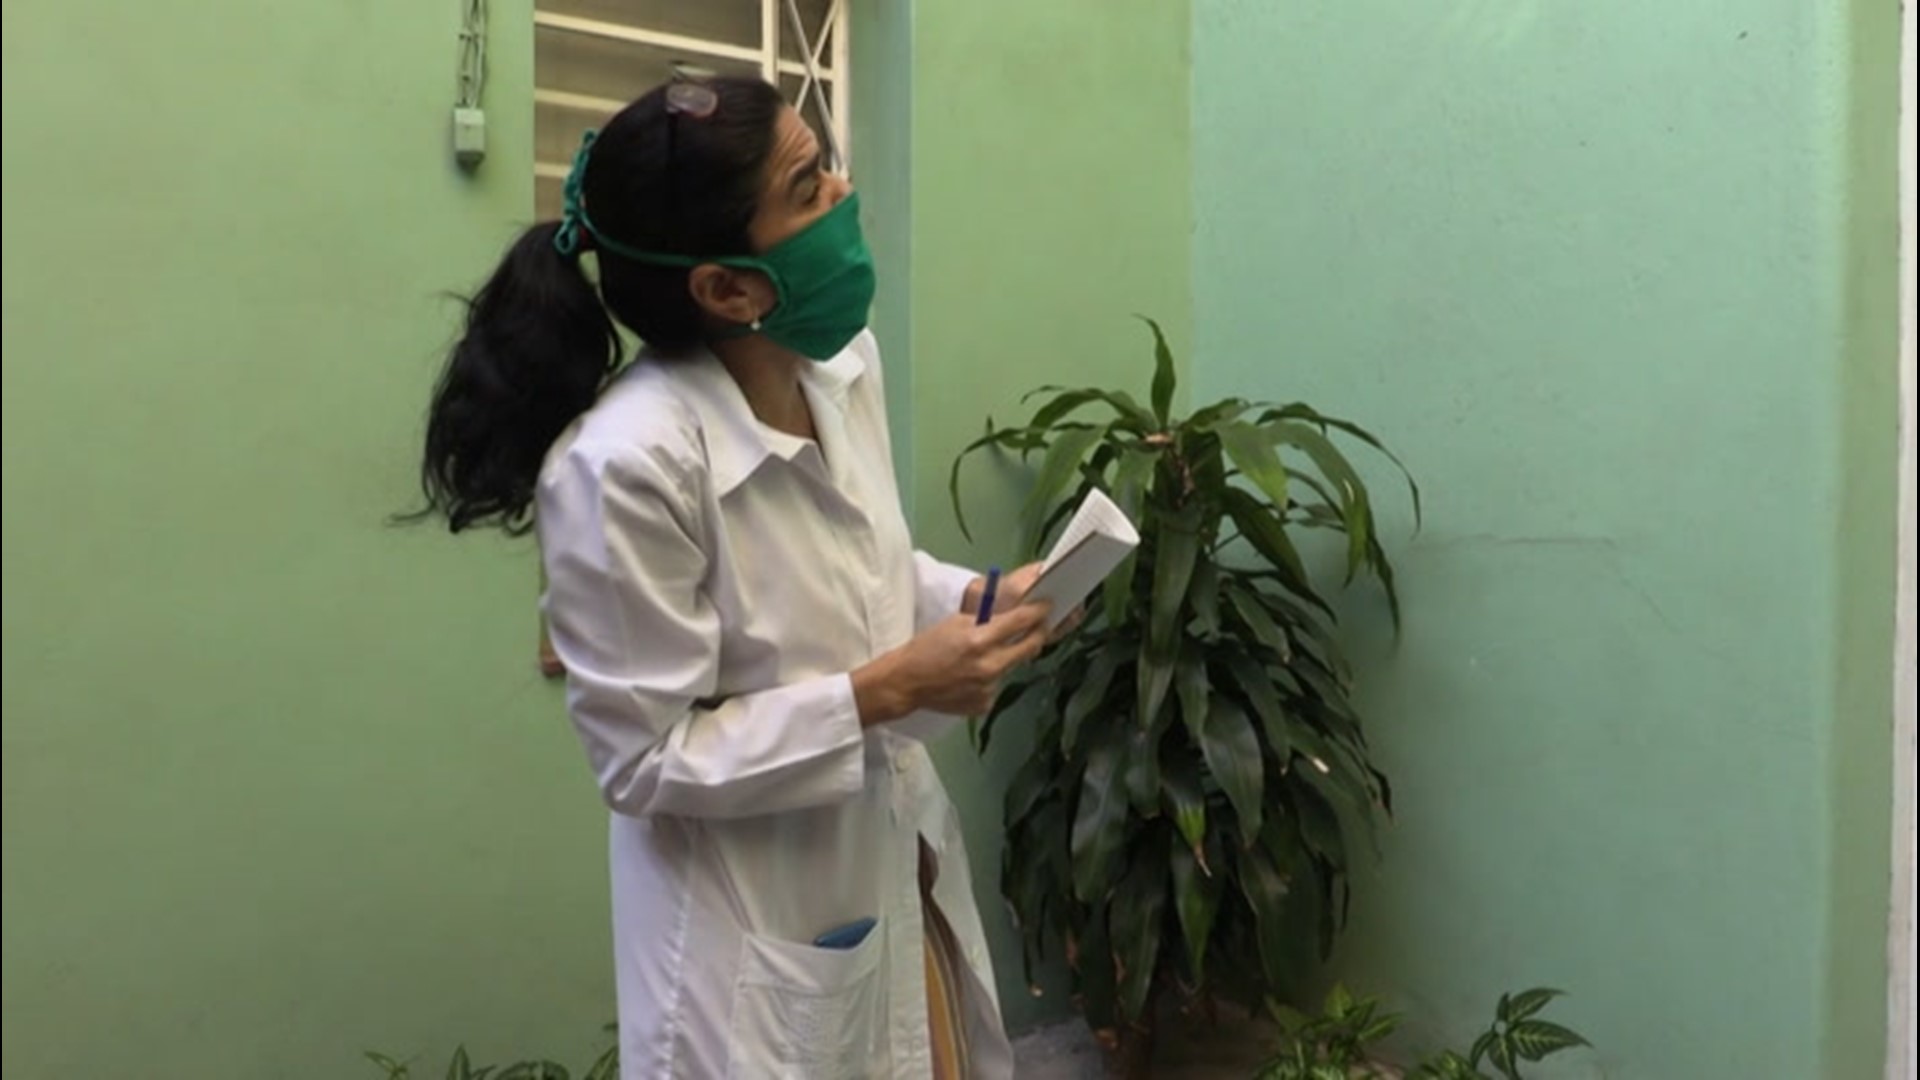 Doctors in Havana, Cuba, were going door-to-door in low-income neighborhoods on March 31, checking on residents as COVID-19 continues to spread around the world.